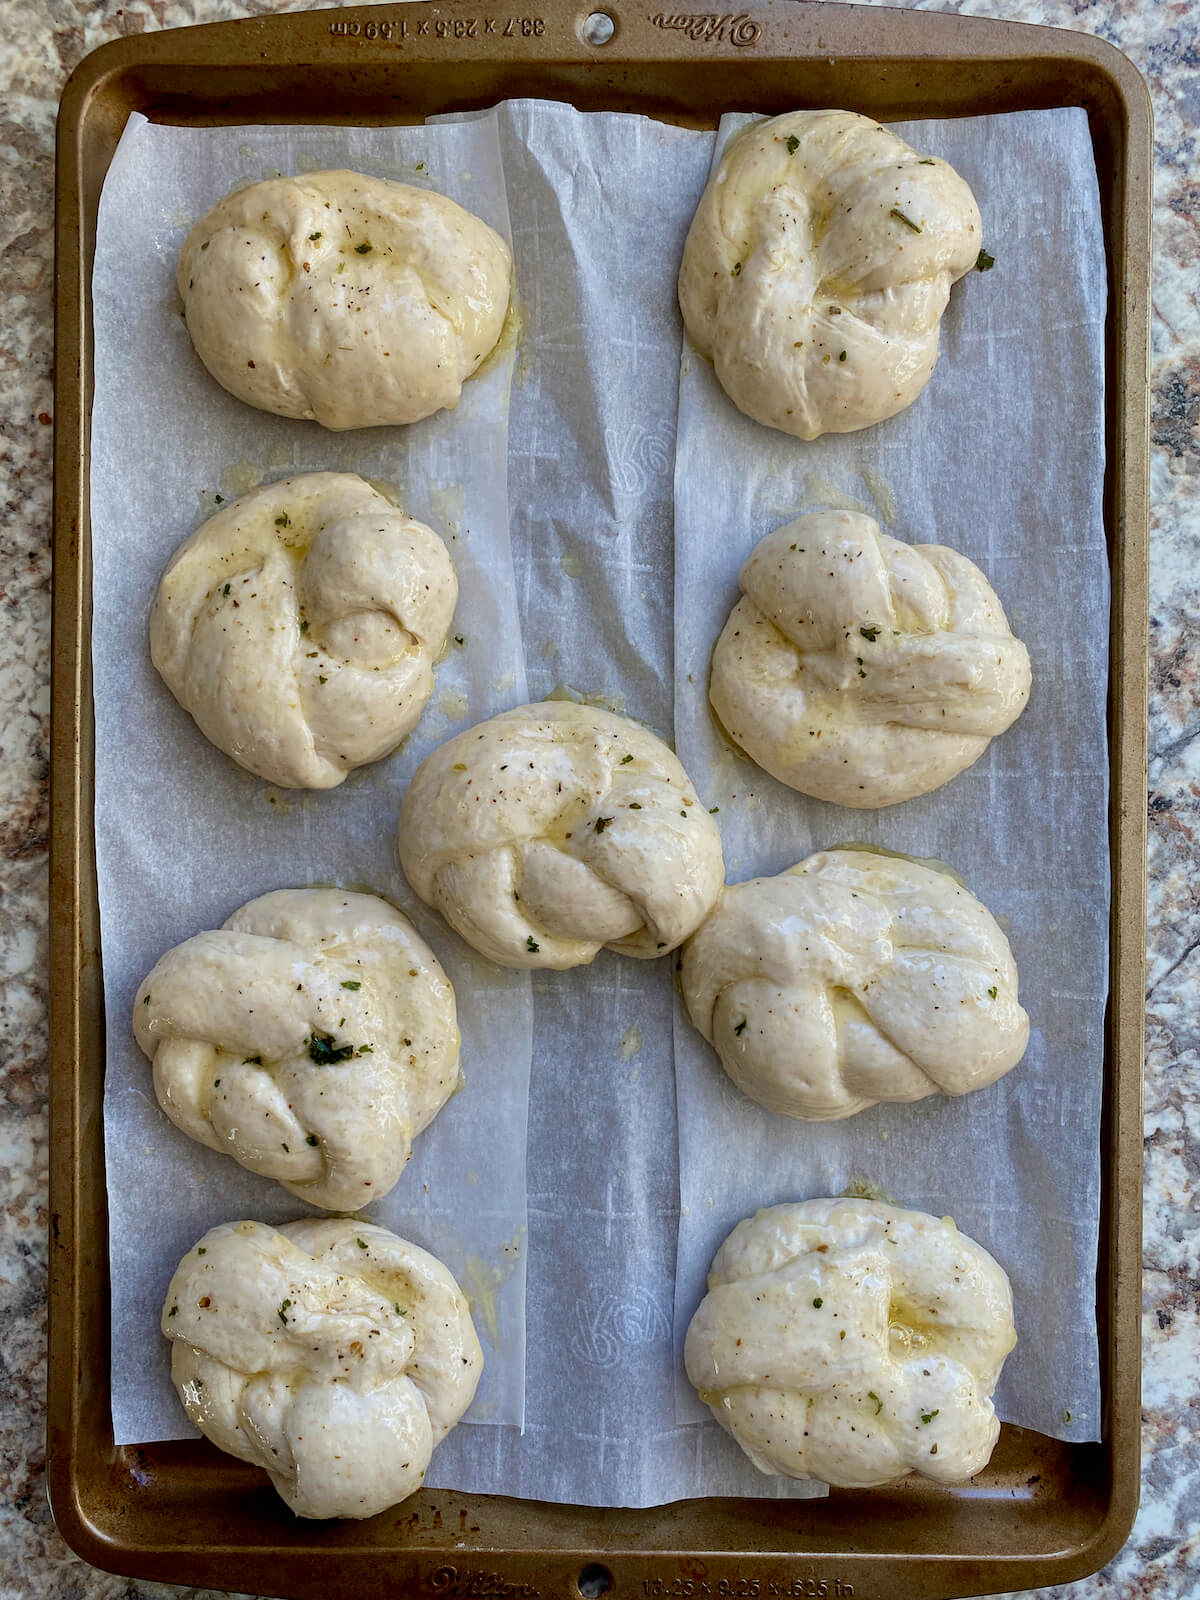 Buttered garlic knots on a parchment-lined baking sheet before baking.